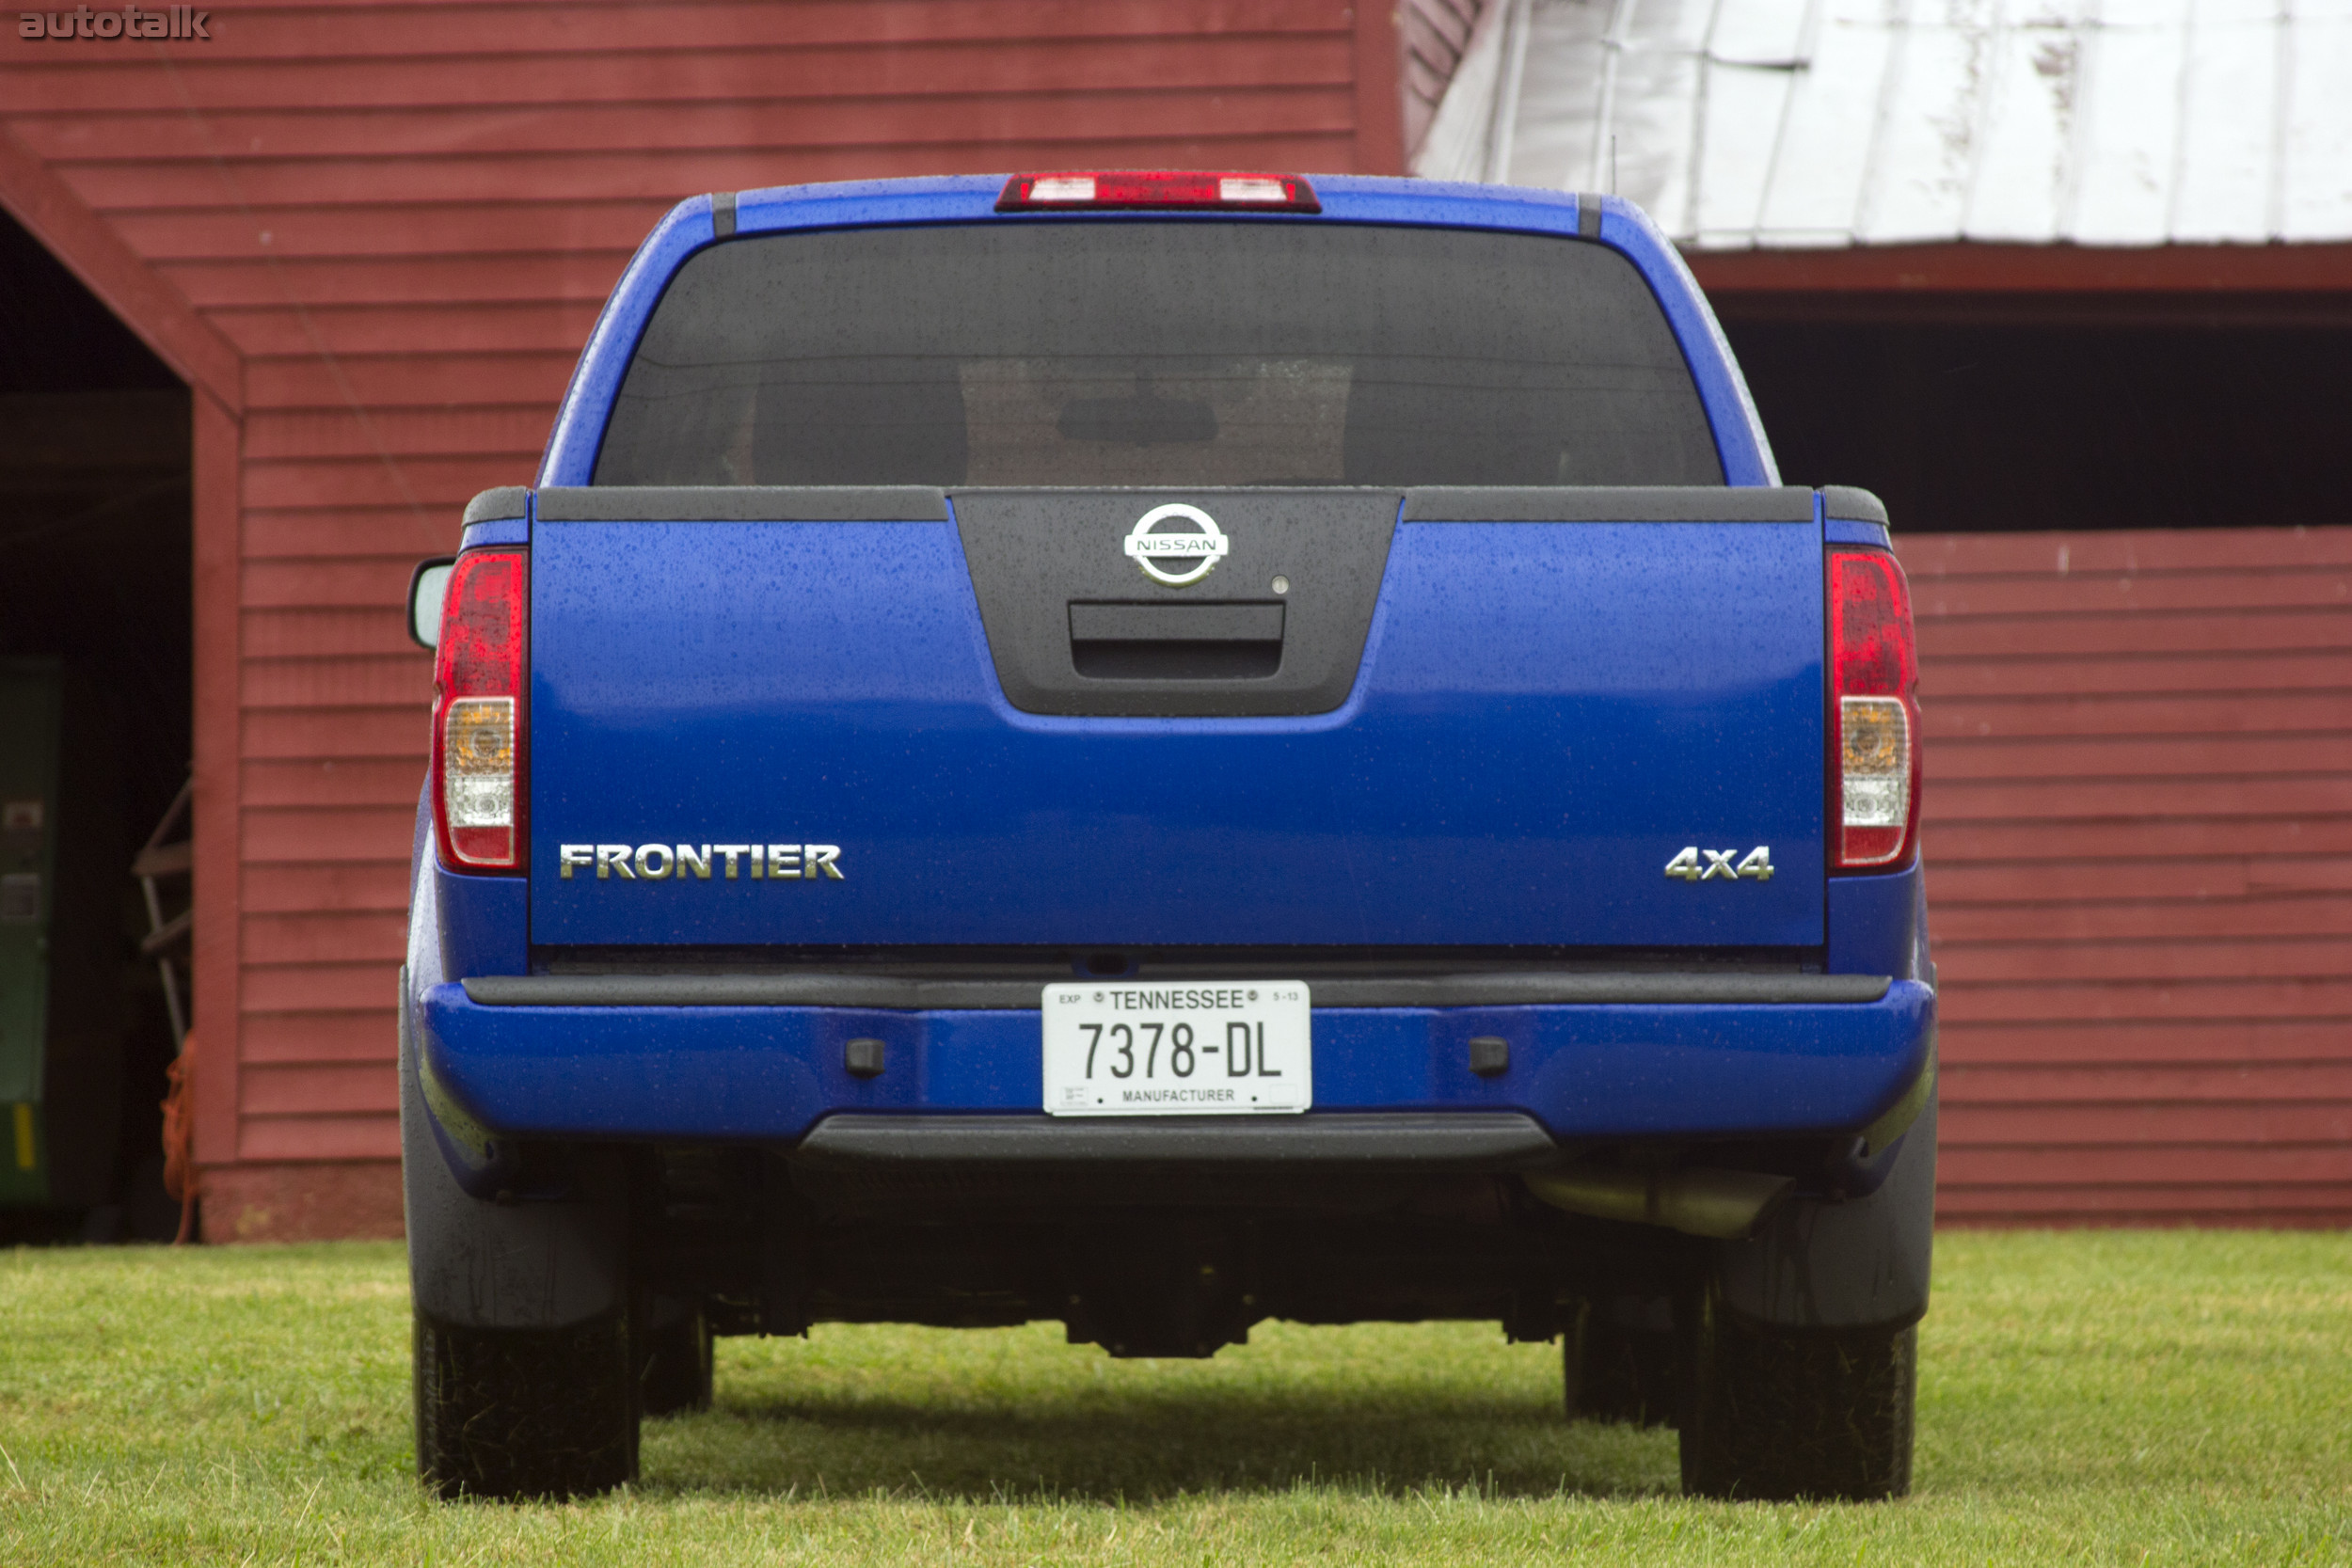 2012 Nissan Frontier 4x4 SV Review